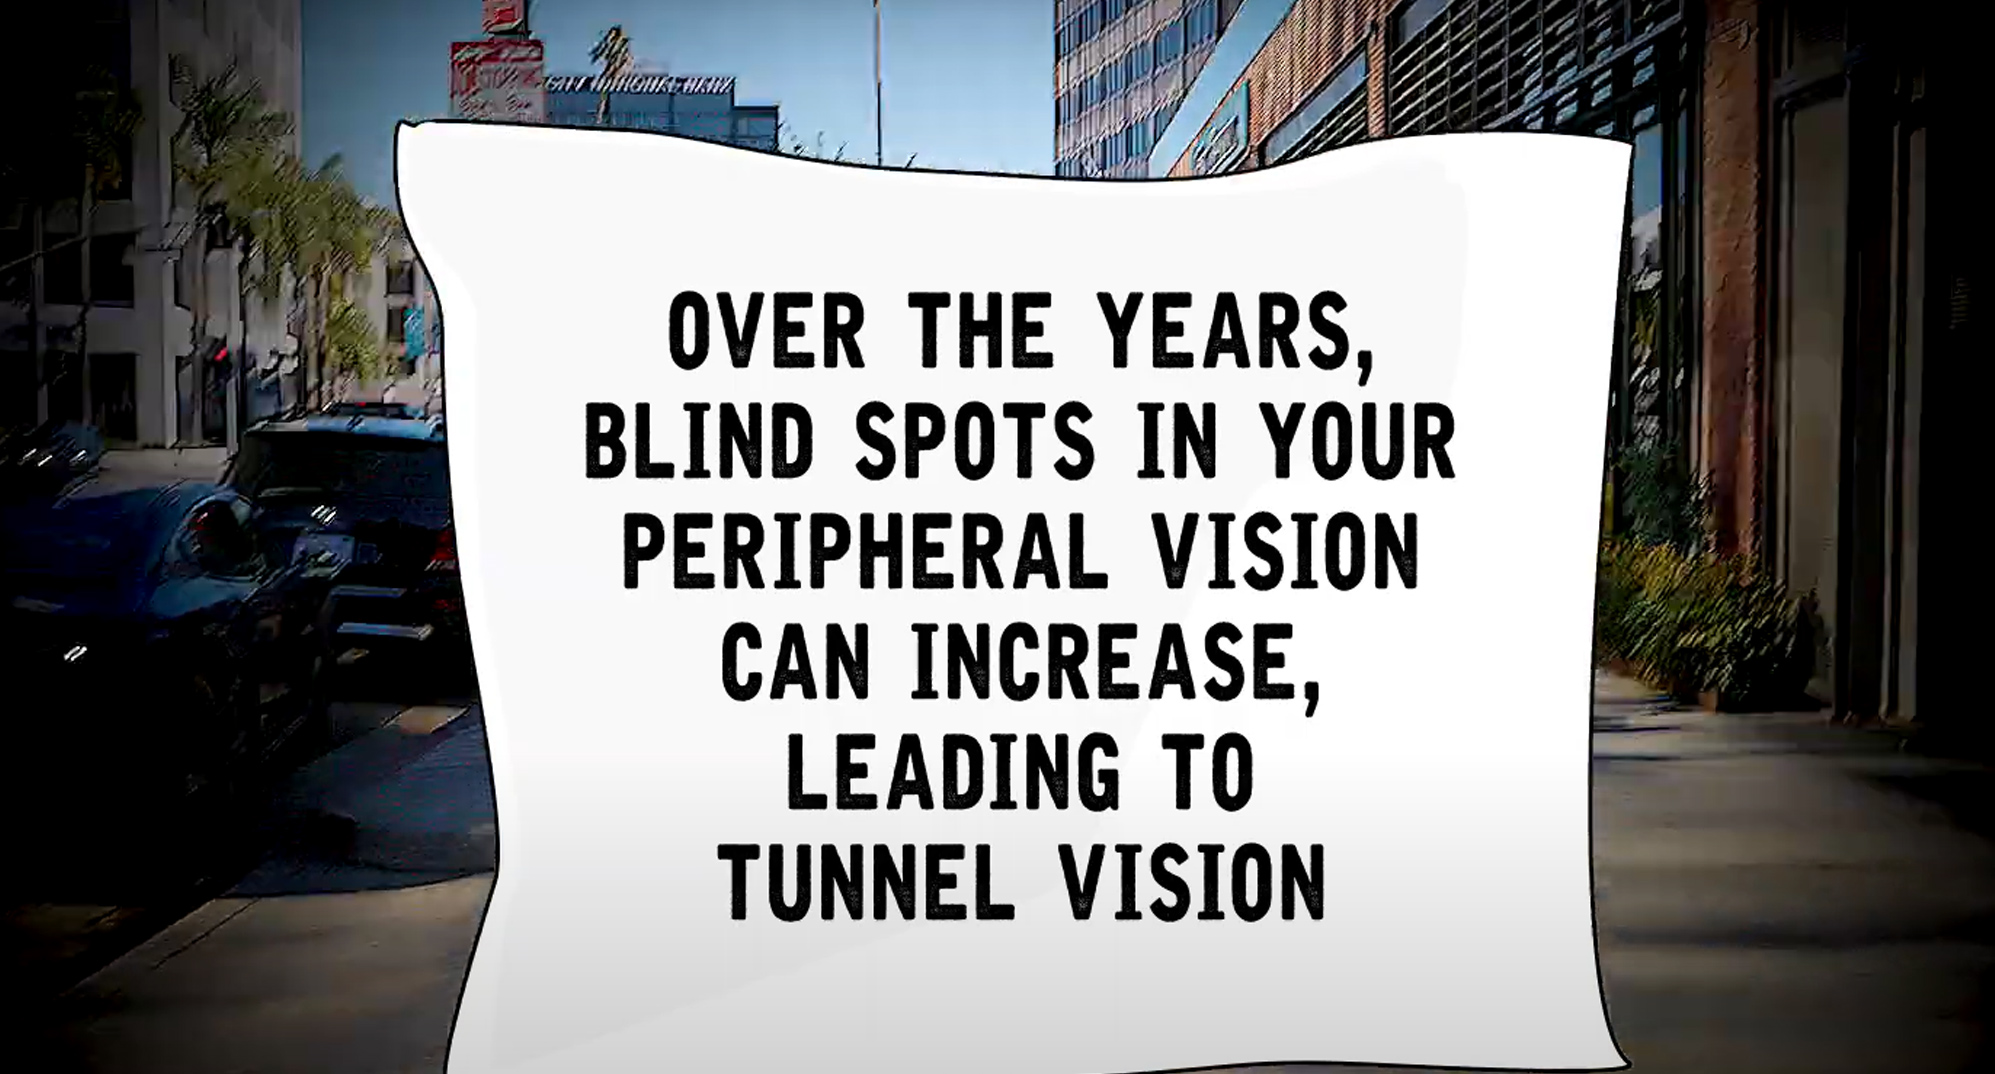 Tunnel vision view with sign Over the Year, Blind Spots in Your Peripheral Vision can Increase Leading to Tunnel Vision